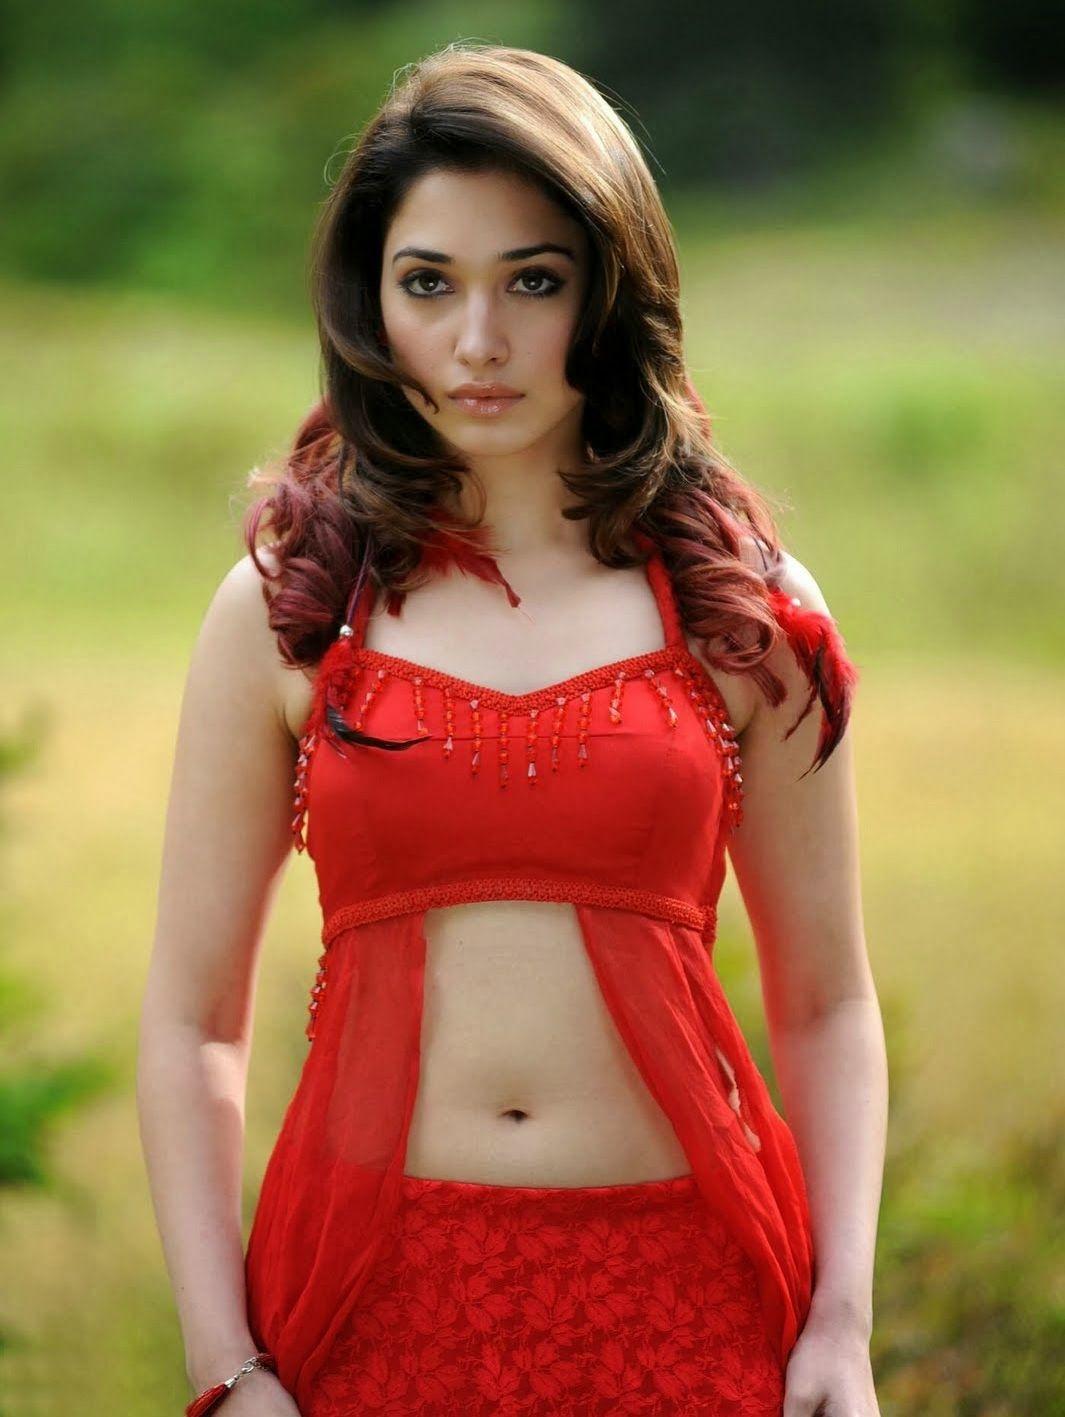 Tamanna bhatia hot mobile free wallpaper and background